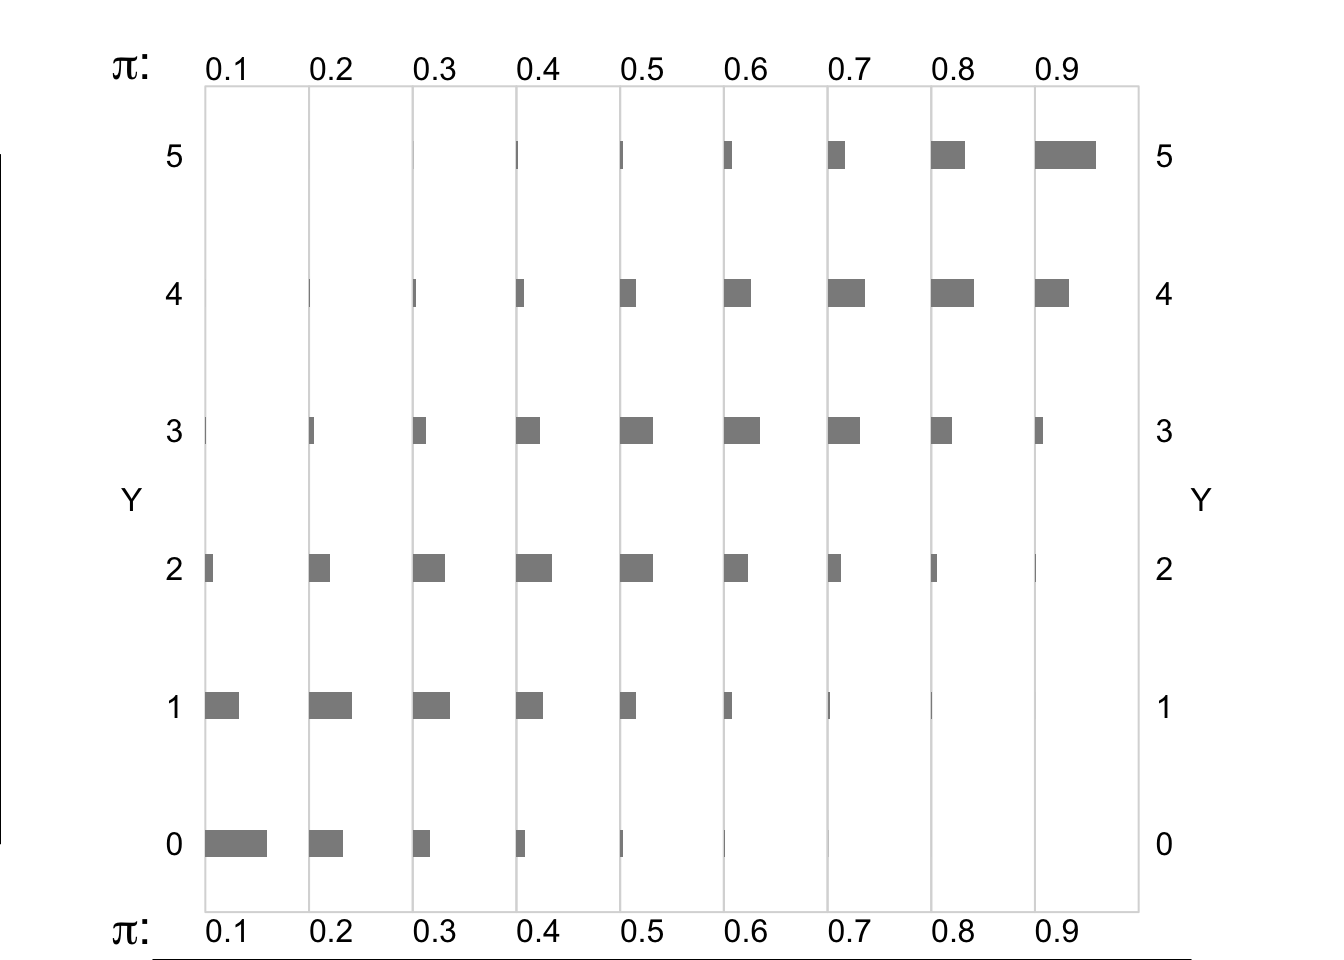 Binomial random variables/distributions, where n = 5, and the Bernoulli expectation (probability) is smaller (left panels) or larger (right panels).